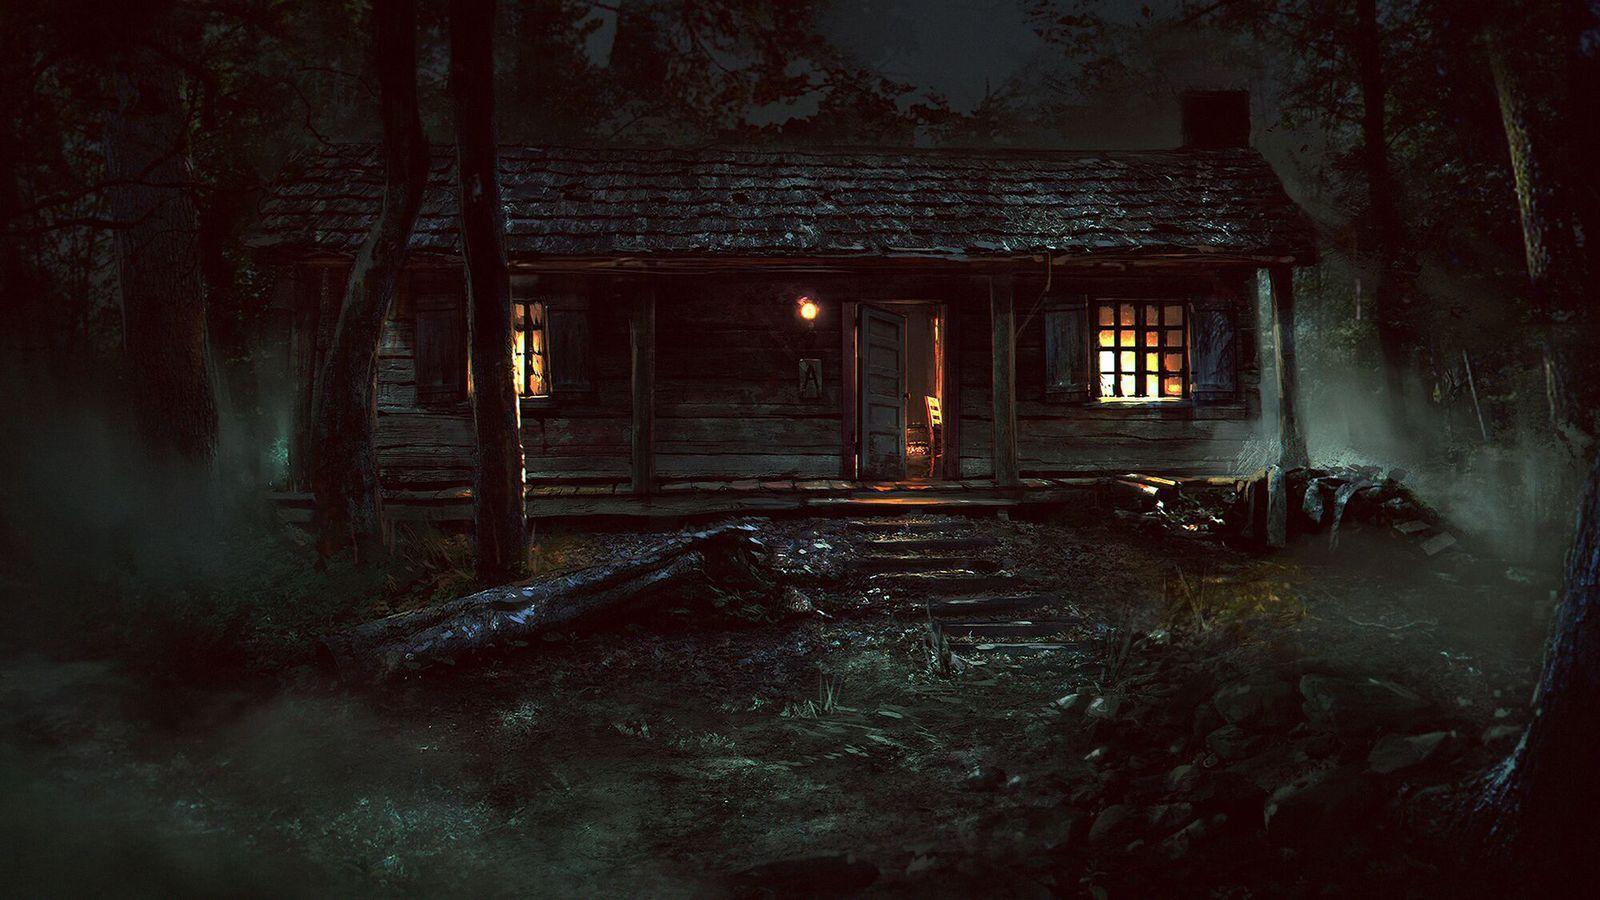 Friday the 13th: The Game launches digitally in late May